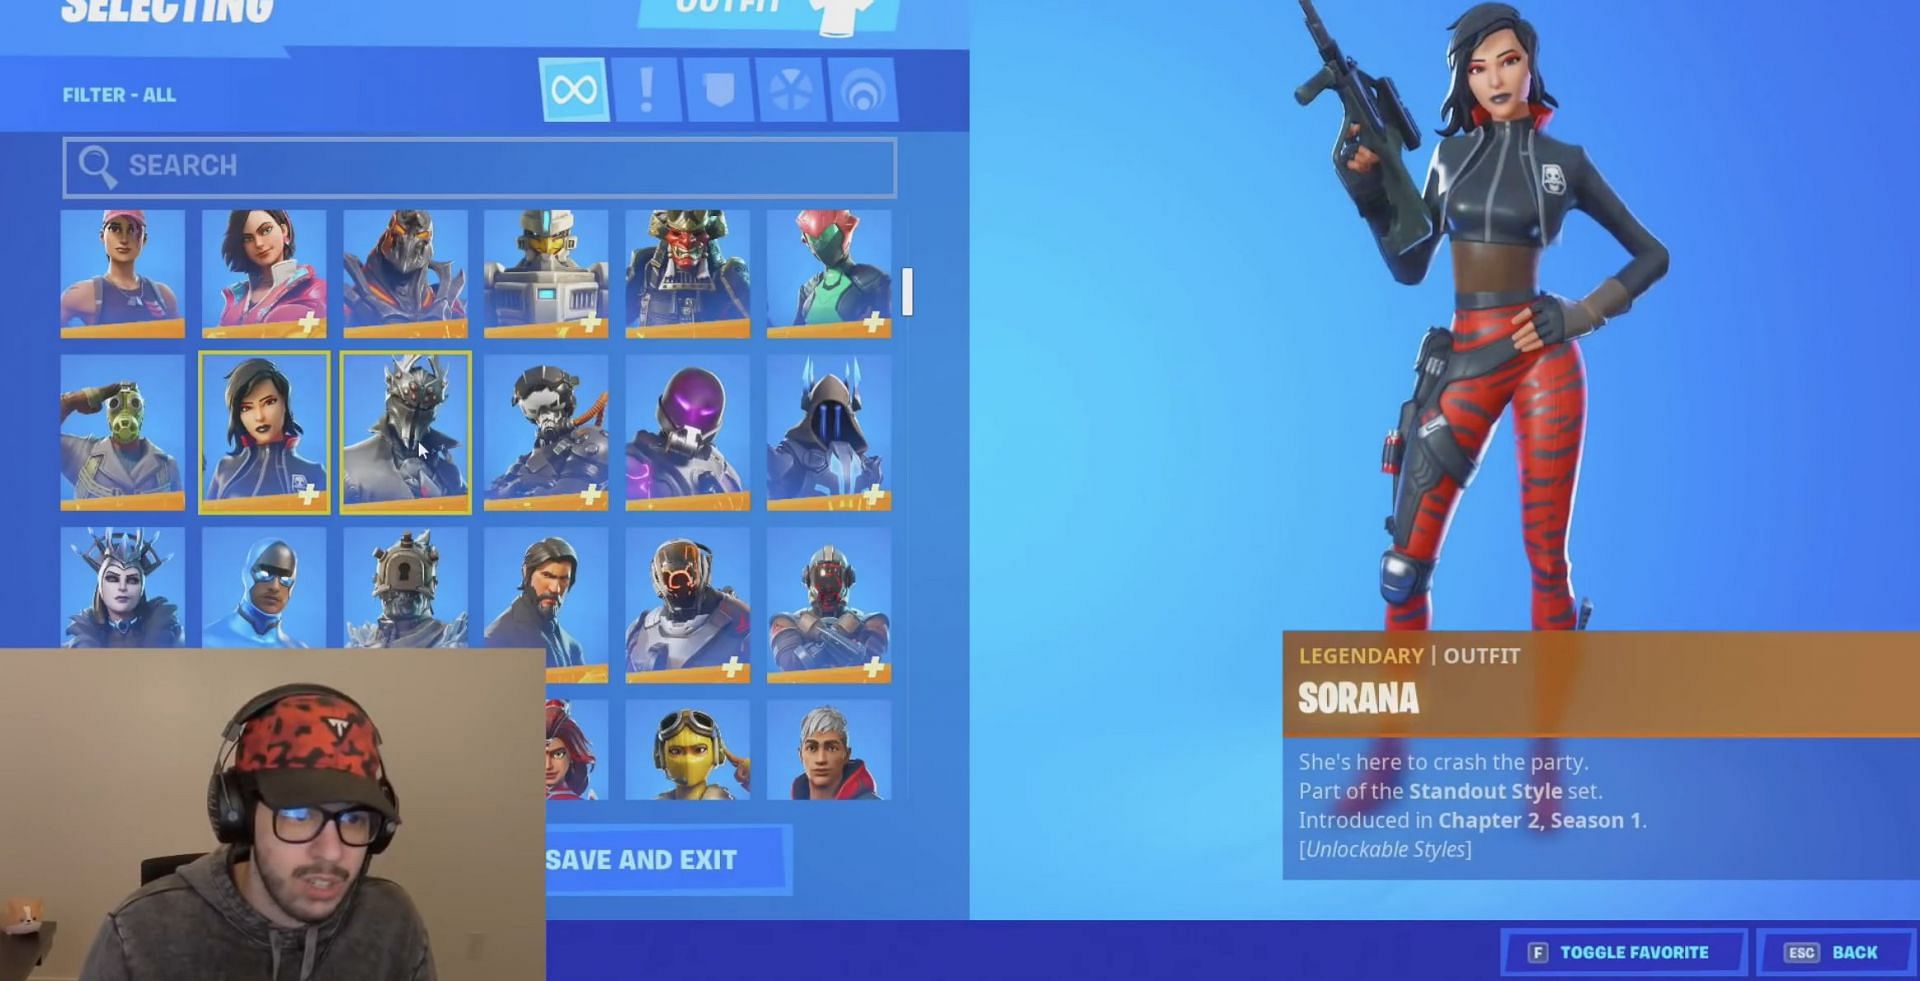 Viewing all cosmetics (image via TG Plays / YouTube)